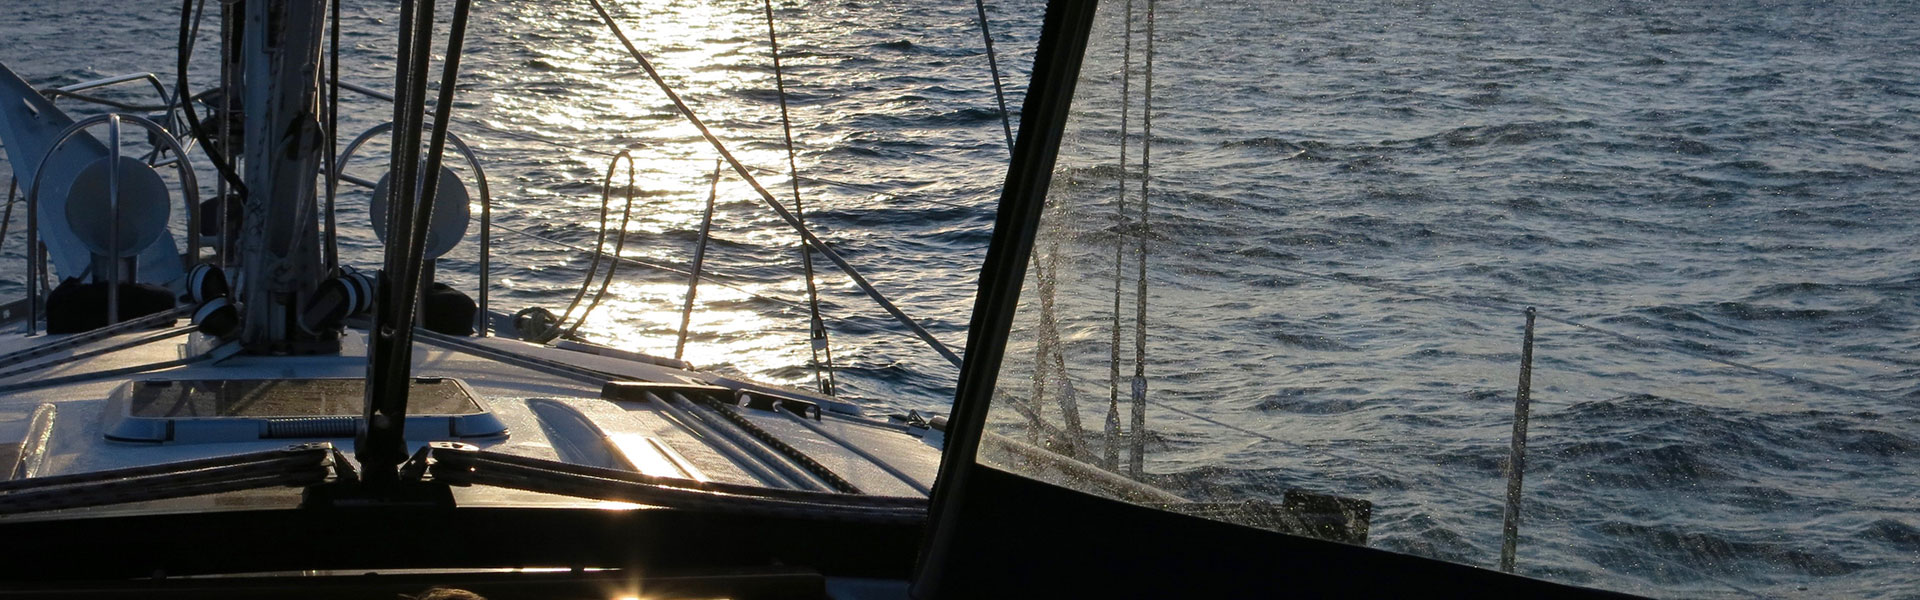 View of the Pacific from the deck of a sailboat